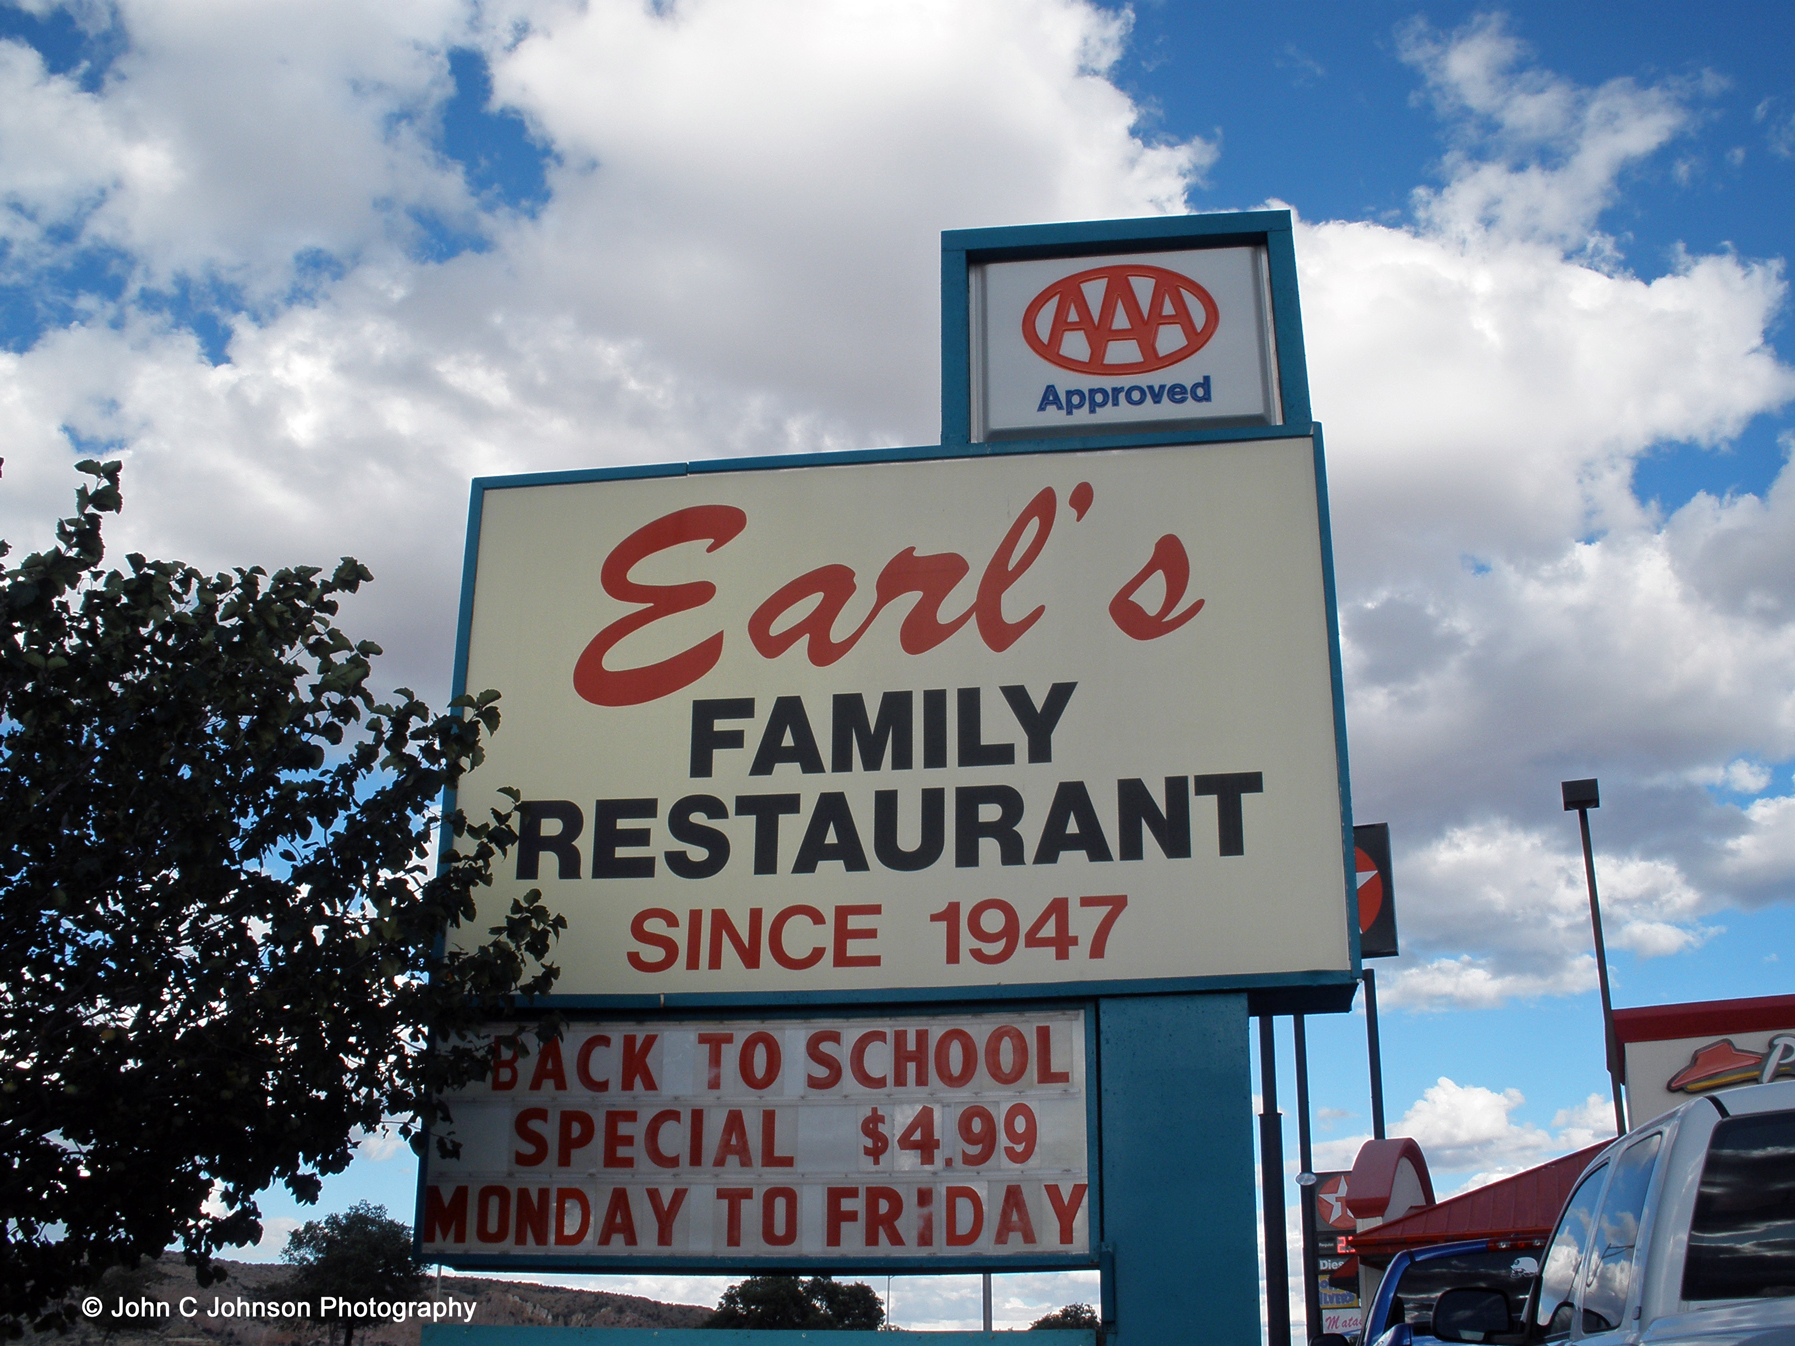 Earl's Family Restaurant Gallup, New Mexico